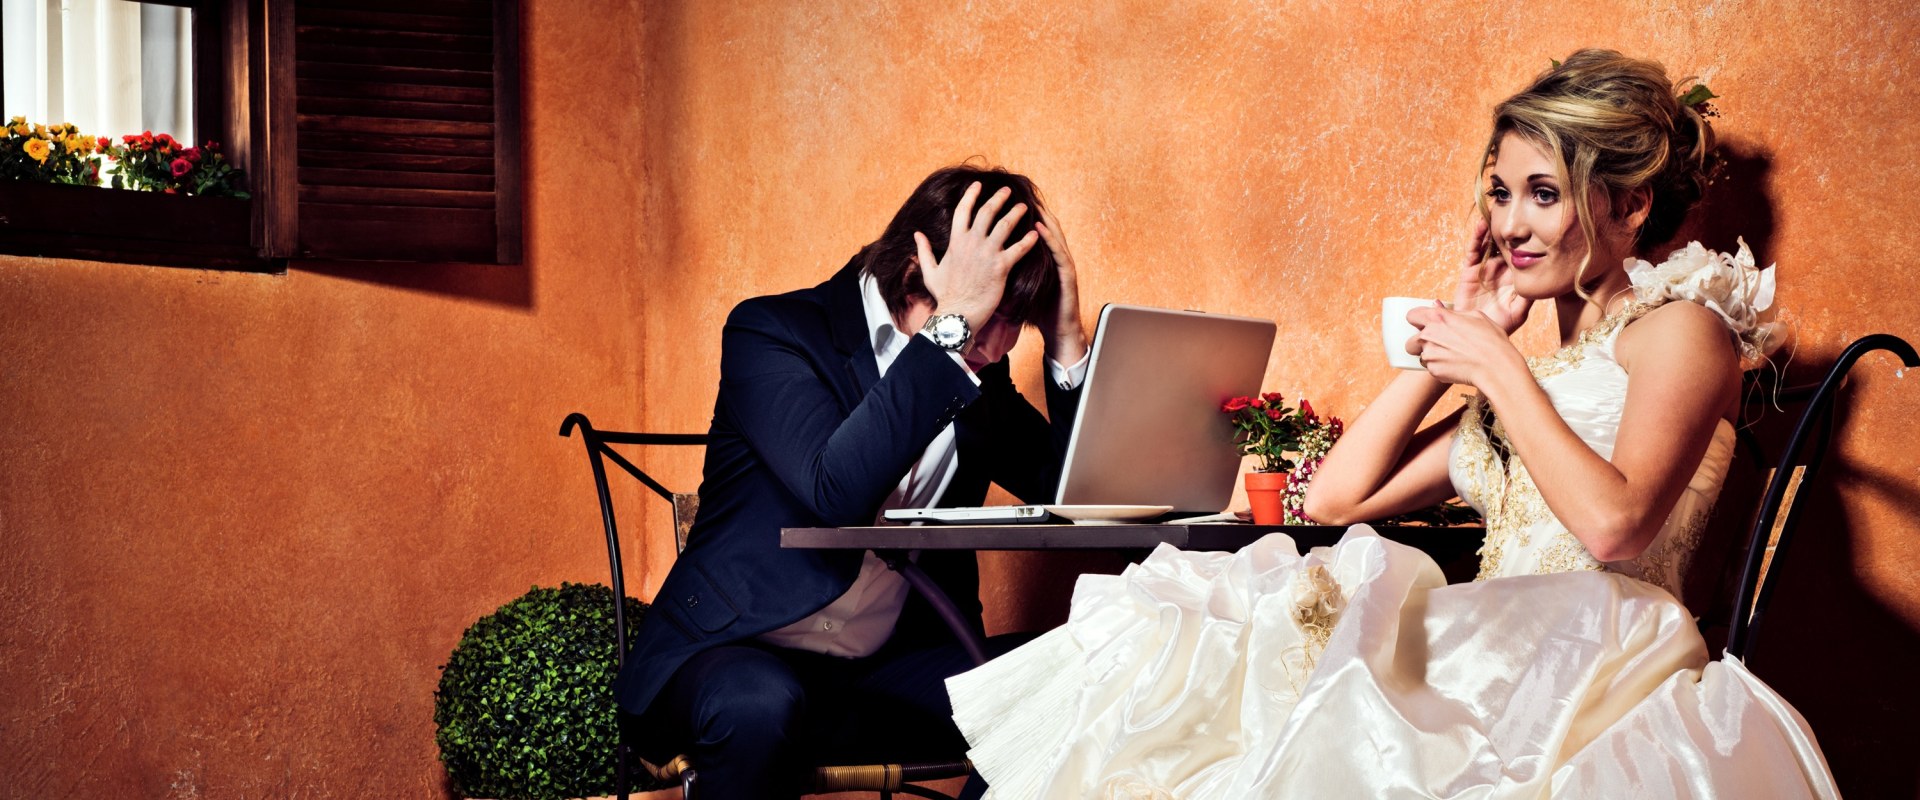 Checking Supplier Insurance and Licenses: A Guide for Choosing the Right Wedding Suppliers